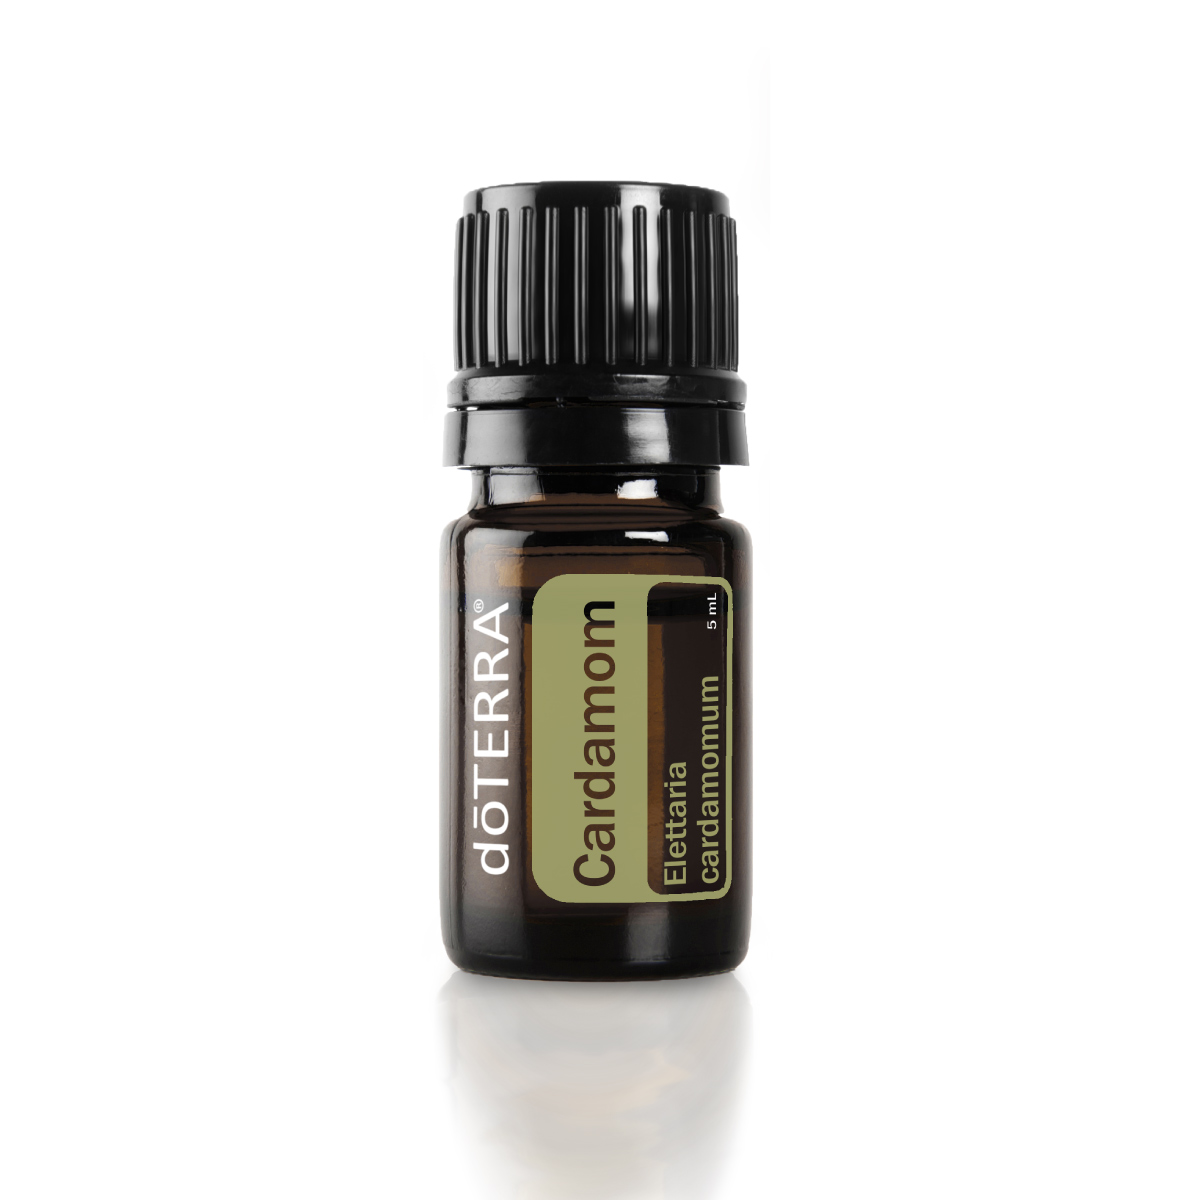 doTERRA Cardamom oil bottle. What is Cardamom oil used for? doTERRA Cardamom oil can be used for cooking, to aid in digestion, to cool the skin, or to promote feelings of easy breathing.